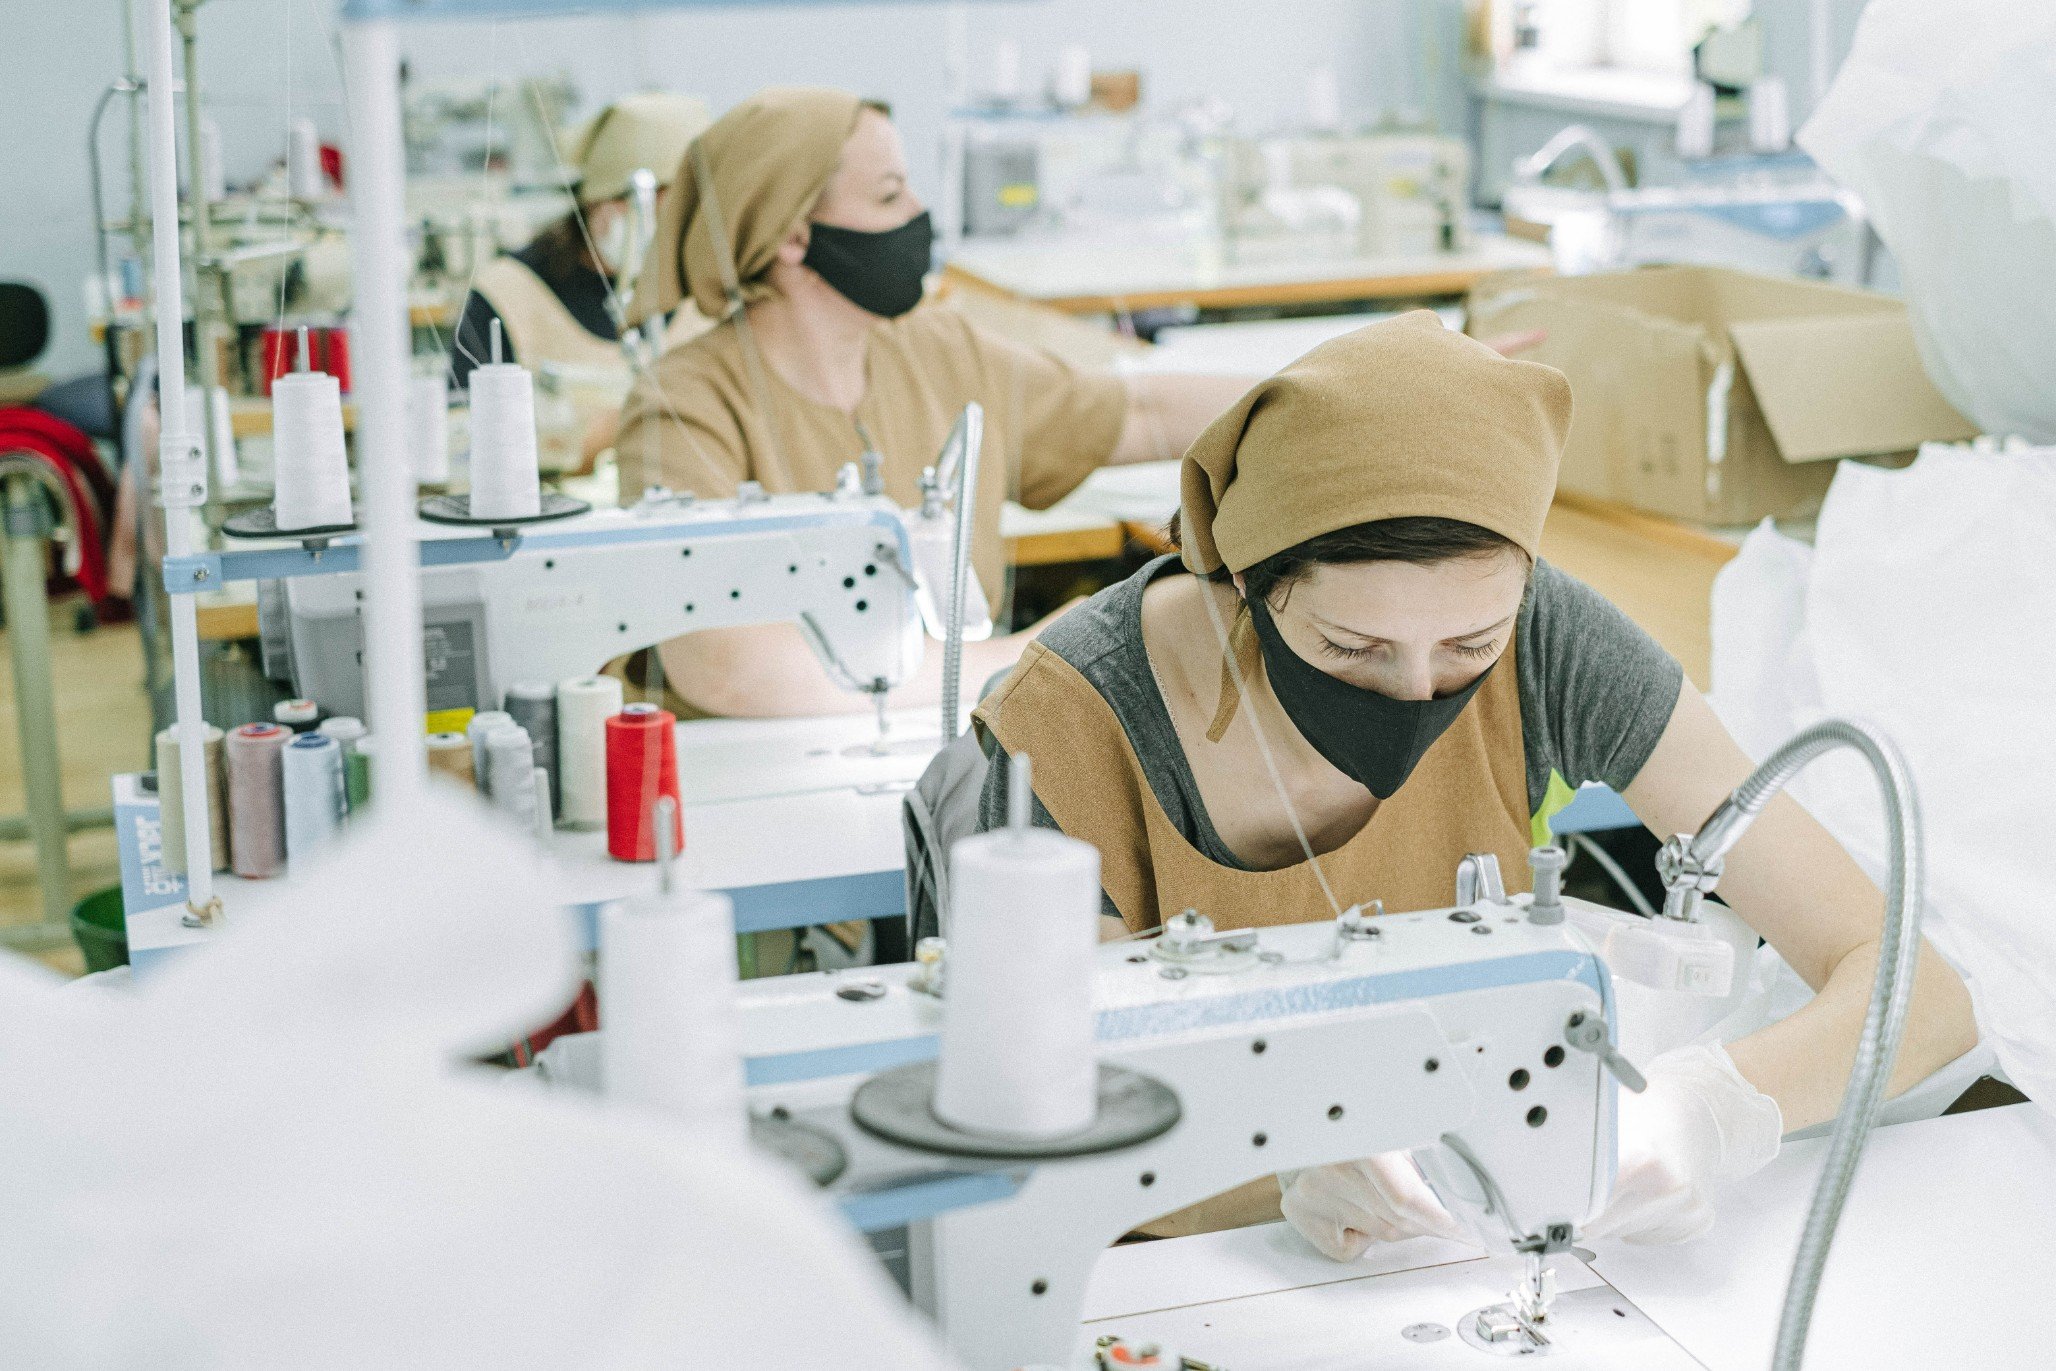 The FABRIC Act Fast Fashion Garment Workers